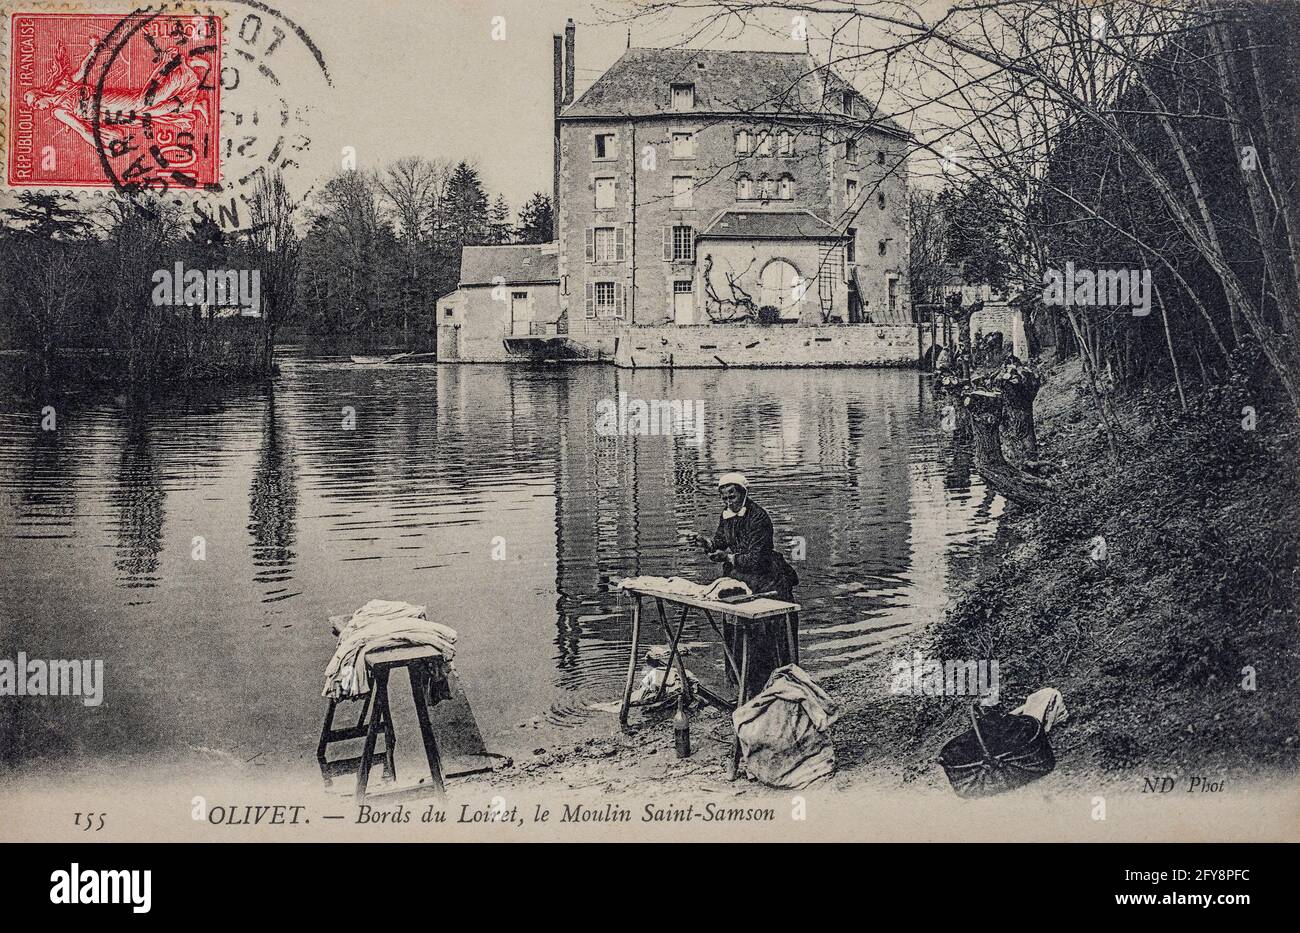 1907 French postcard depicting a woman washing clothing on the bank of the river Loiret, France. Stock Photo